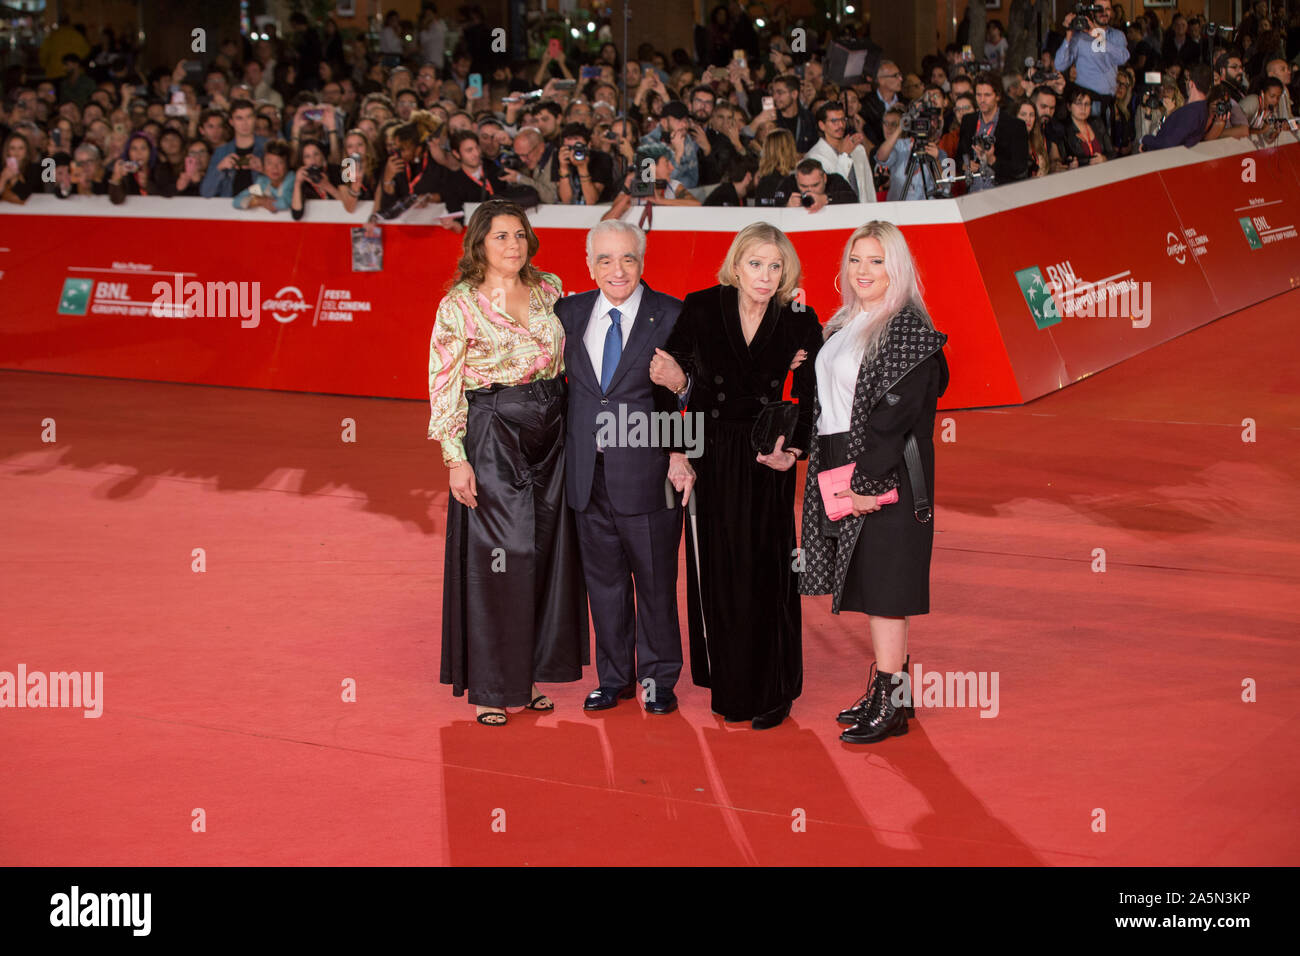 Roma, Italy. 21st Oct, 2019. Martin Scorsese with his wife Helen Morris and his daughters Catherine Scorsese and Francesca Scorsese Red carpet for the presentation of the film 'The Irishman' on the fifth day of the Rome Film Fest, on 21 October 2019 (Photo by Matteo Nardone/Pacific Press) Credit: Pacific Press Agency/Alamy Live News Stock Photo